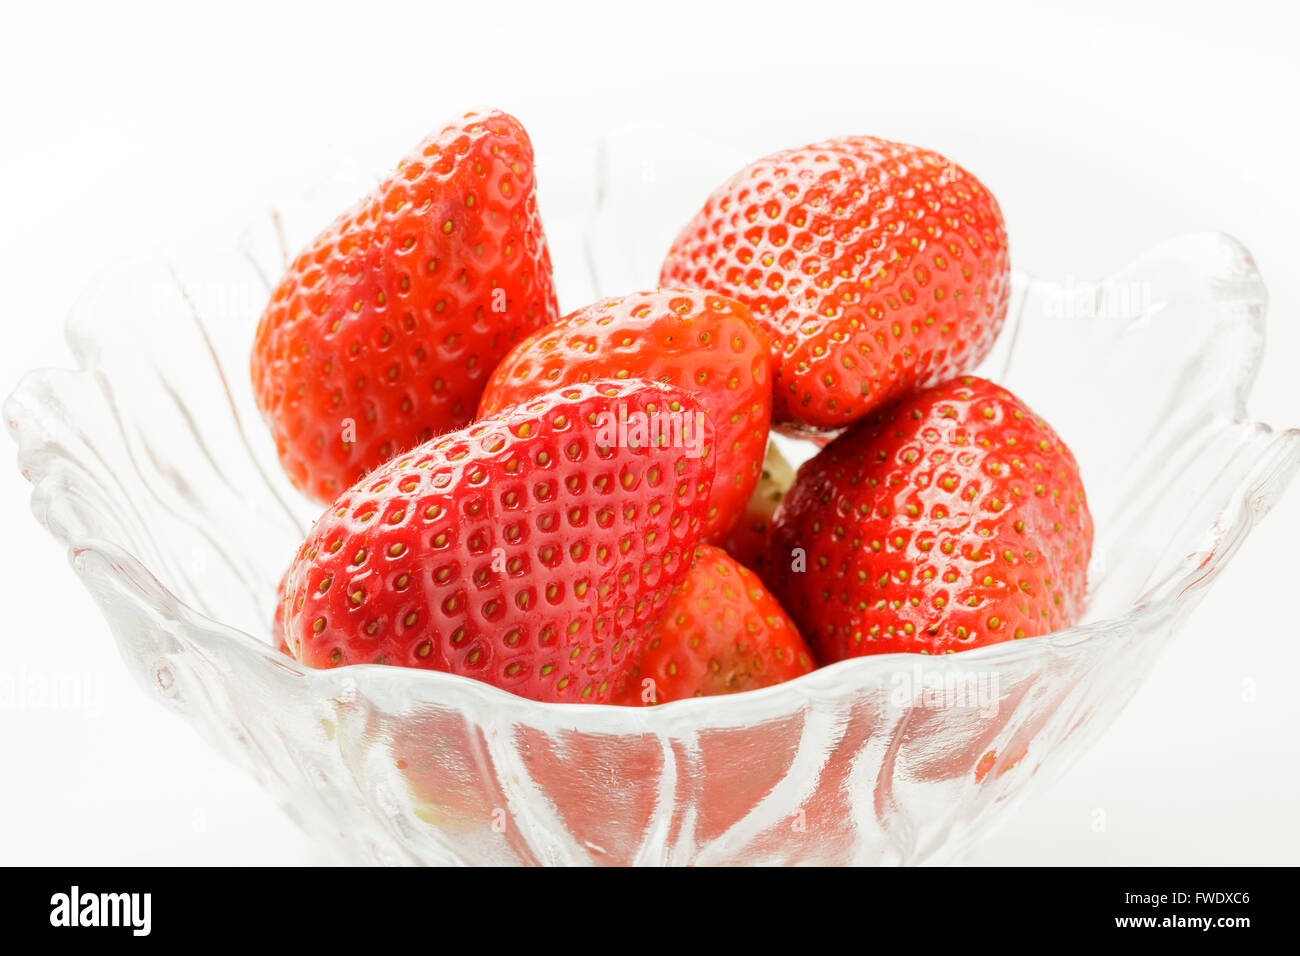 Fresh strawberries in a glass bowl Stock Photo